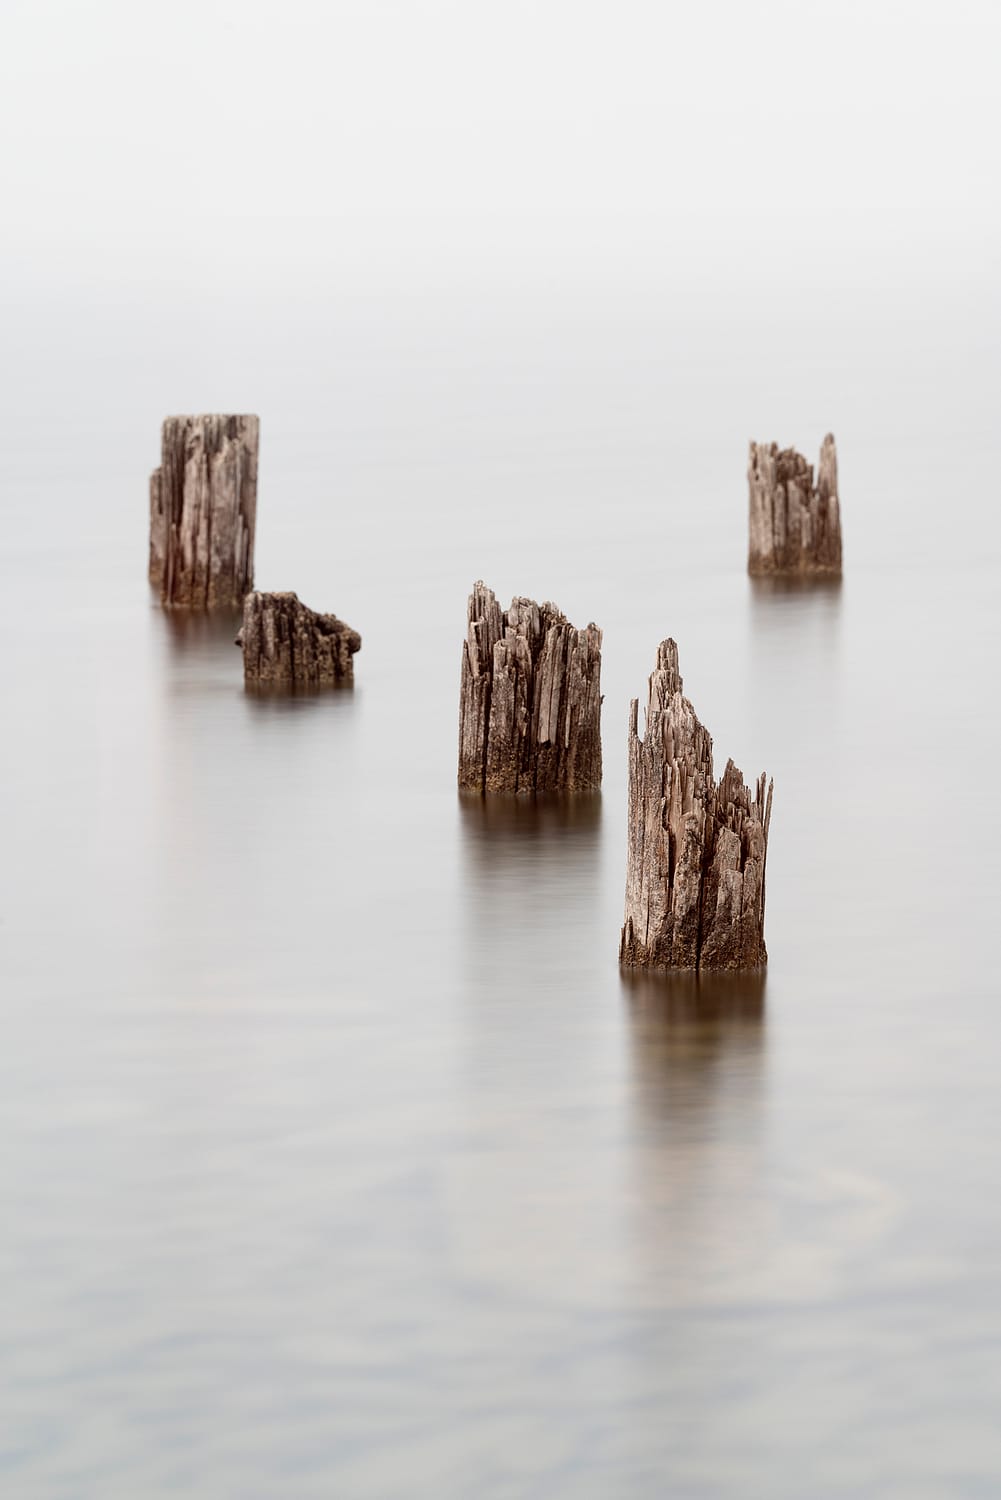 abandoned dock pilings in the fog on a body of water